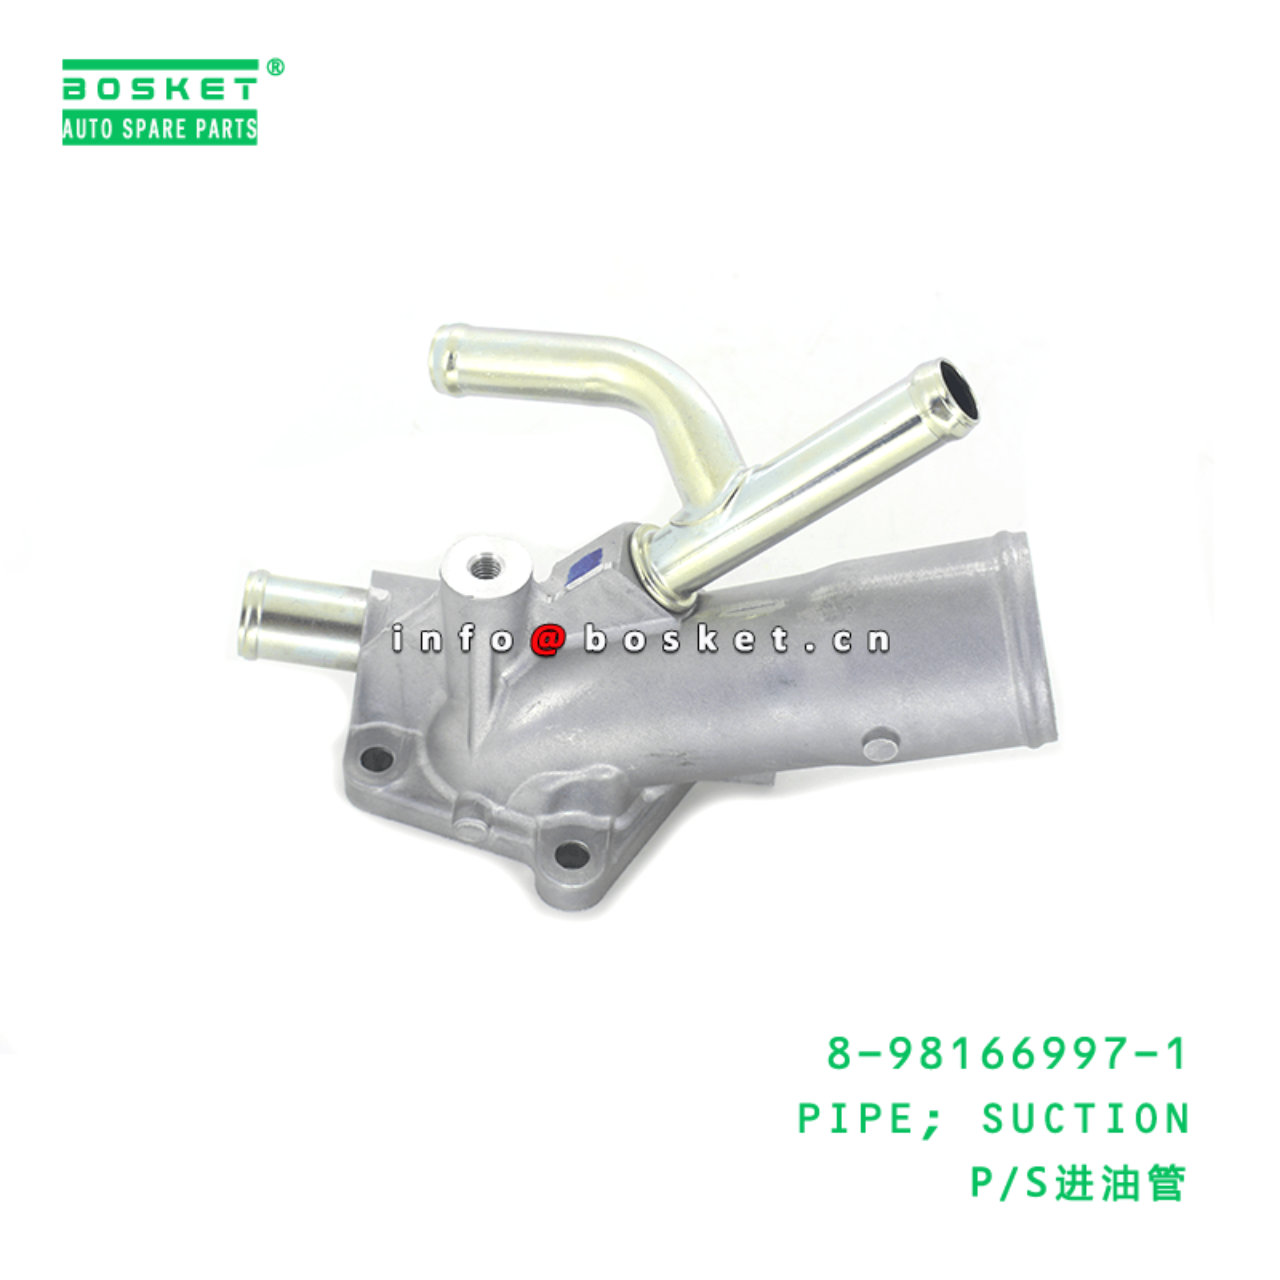 8-98166997-1 Suction Pipe 8981669971 Suitable for ISUZU XD